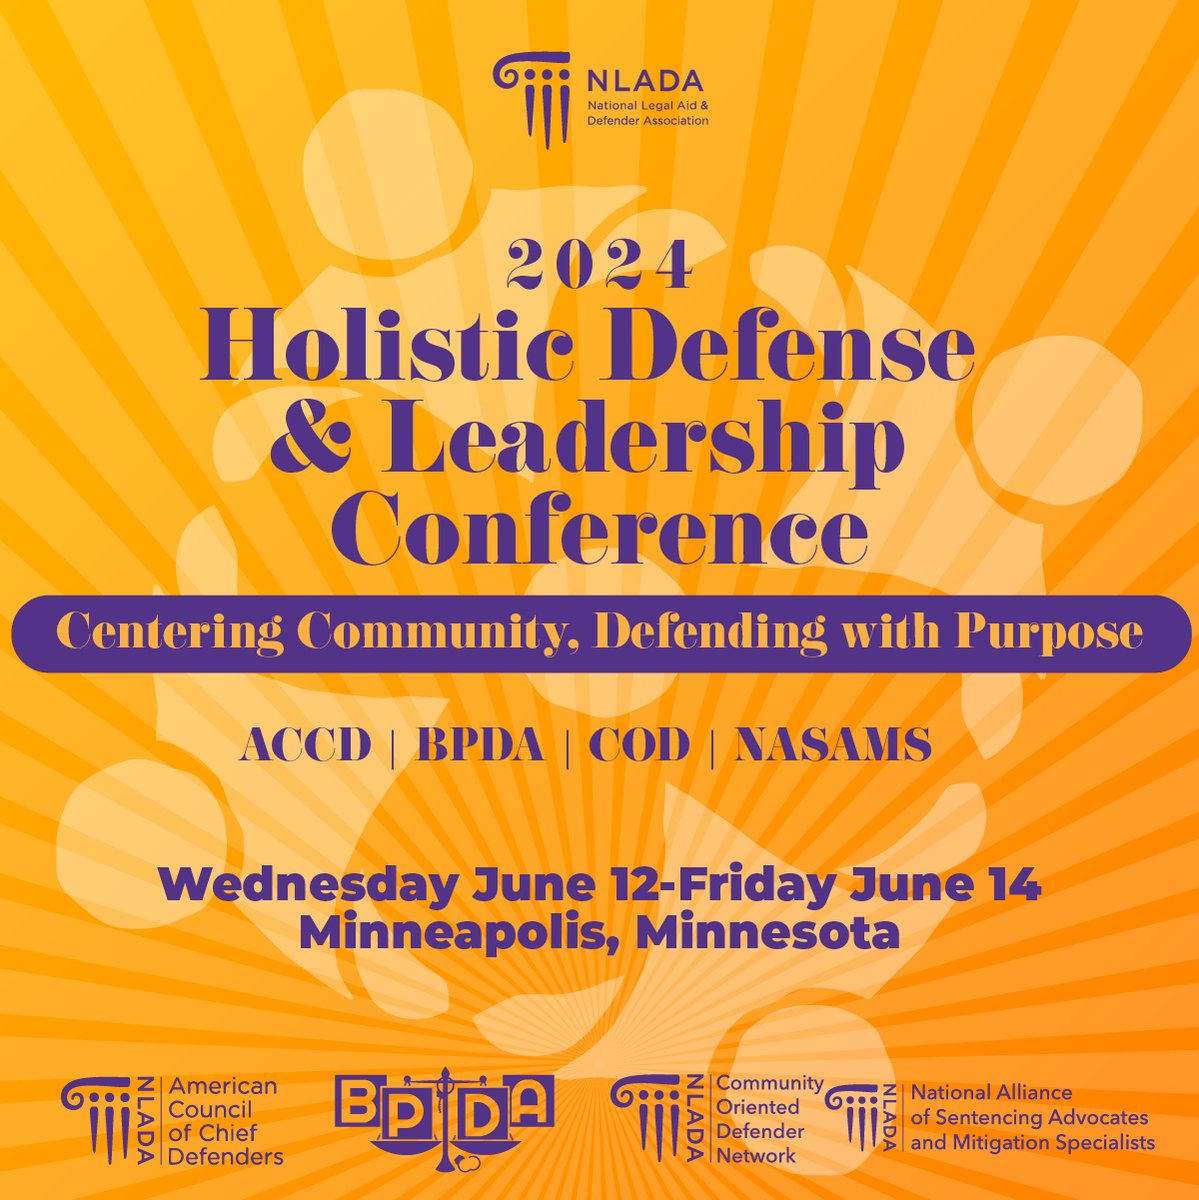 Our annual summer conference is back, and it's bigger and better than ever! This year's theme is 'Centering Community, Defending with Purpose.' Join us in Minneapolis June 12-14 for an unforgettable gathering of minds and hearts. Learn more and sign up: learninglab.nlada.org/Holistic2024.